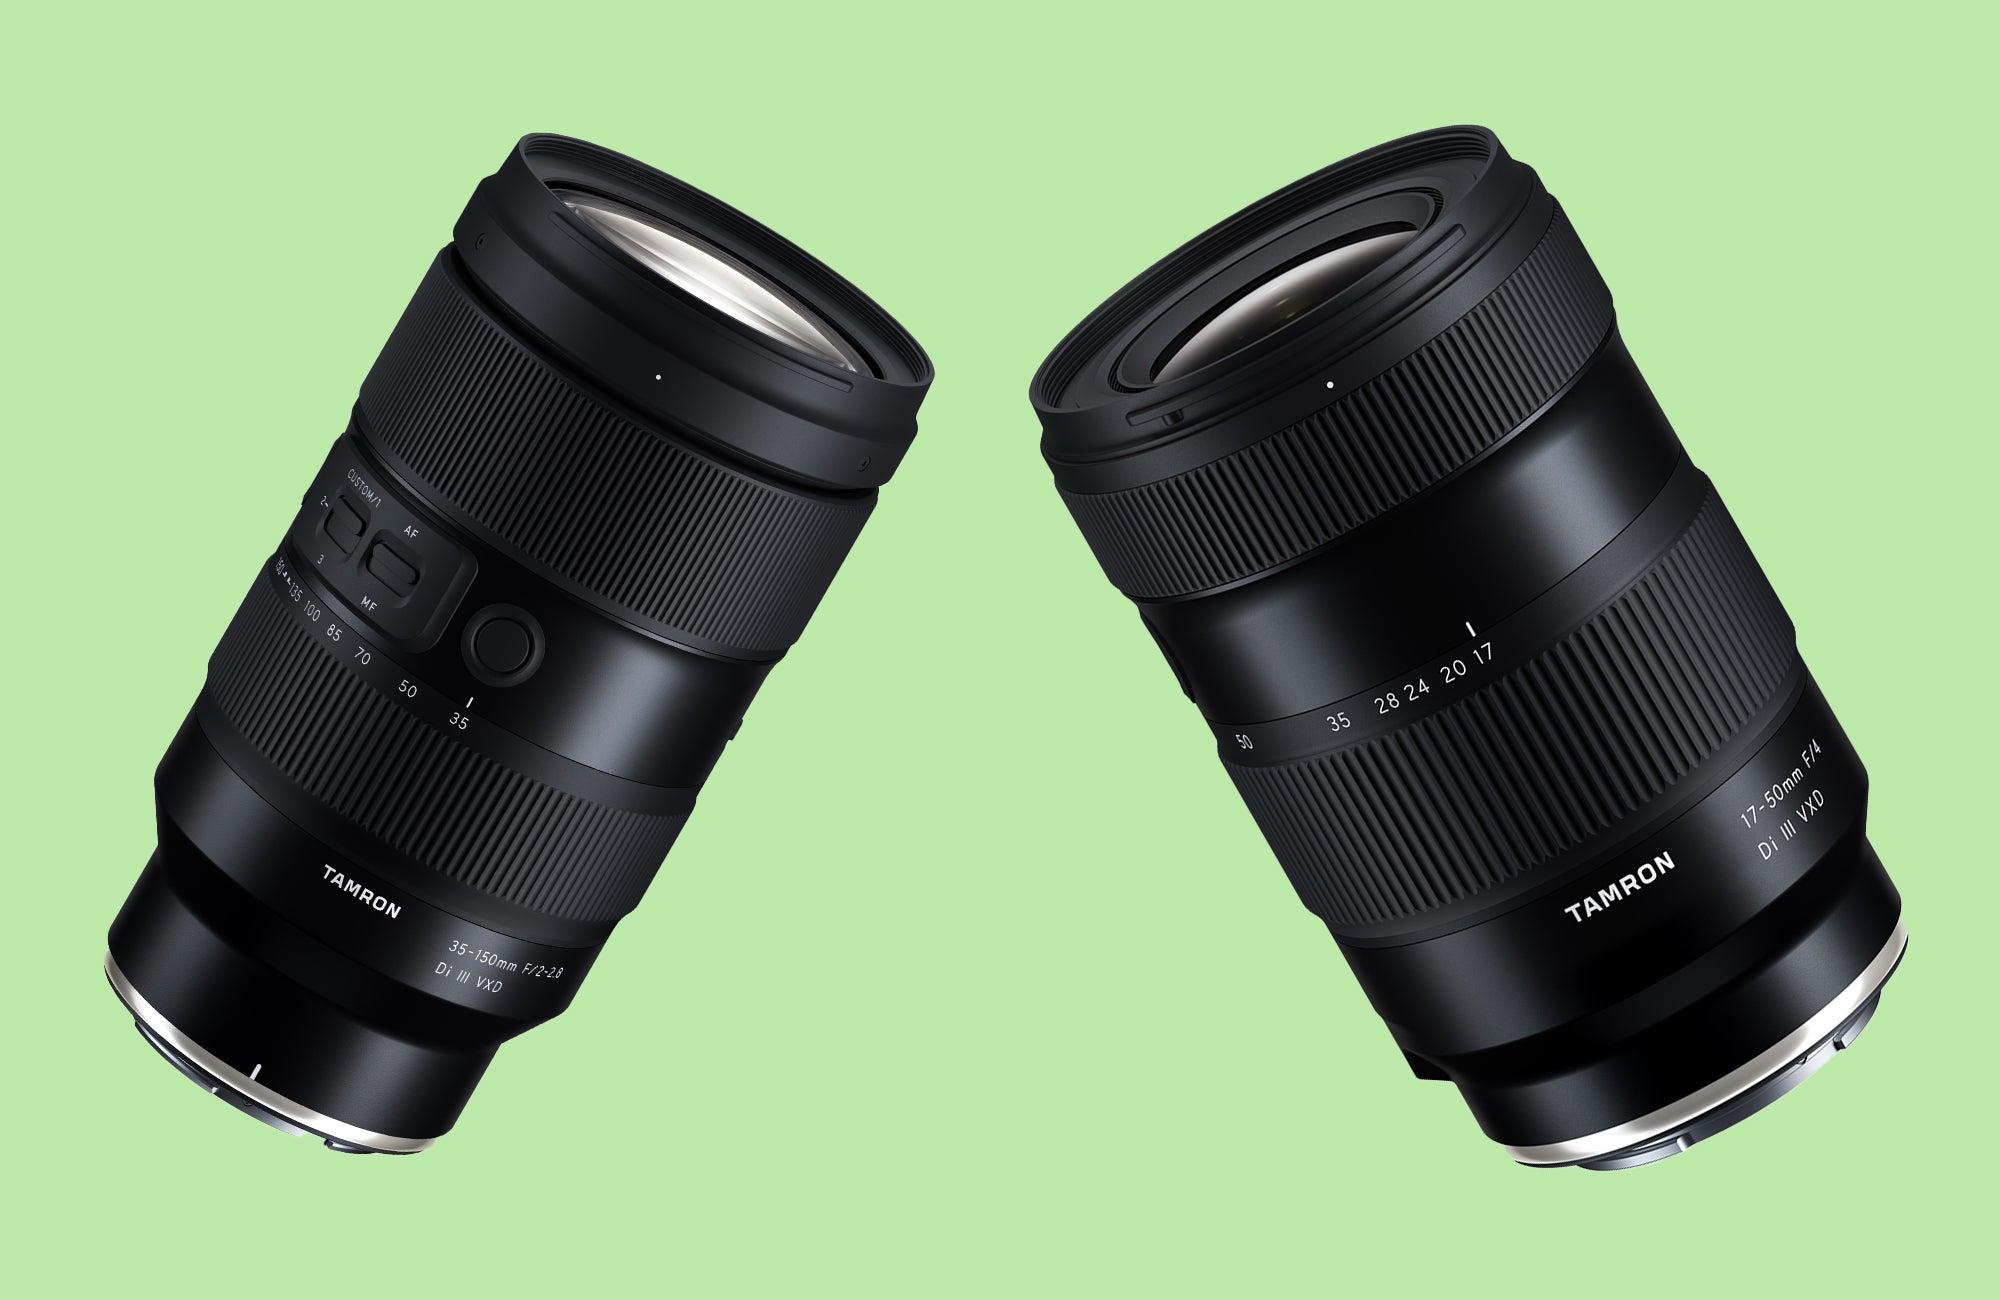 Tamron announces development of a 17-50mm lens for Sony cameras